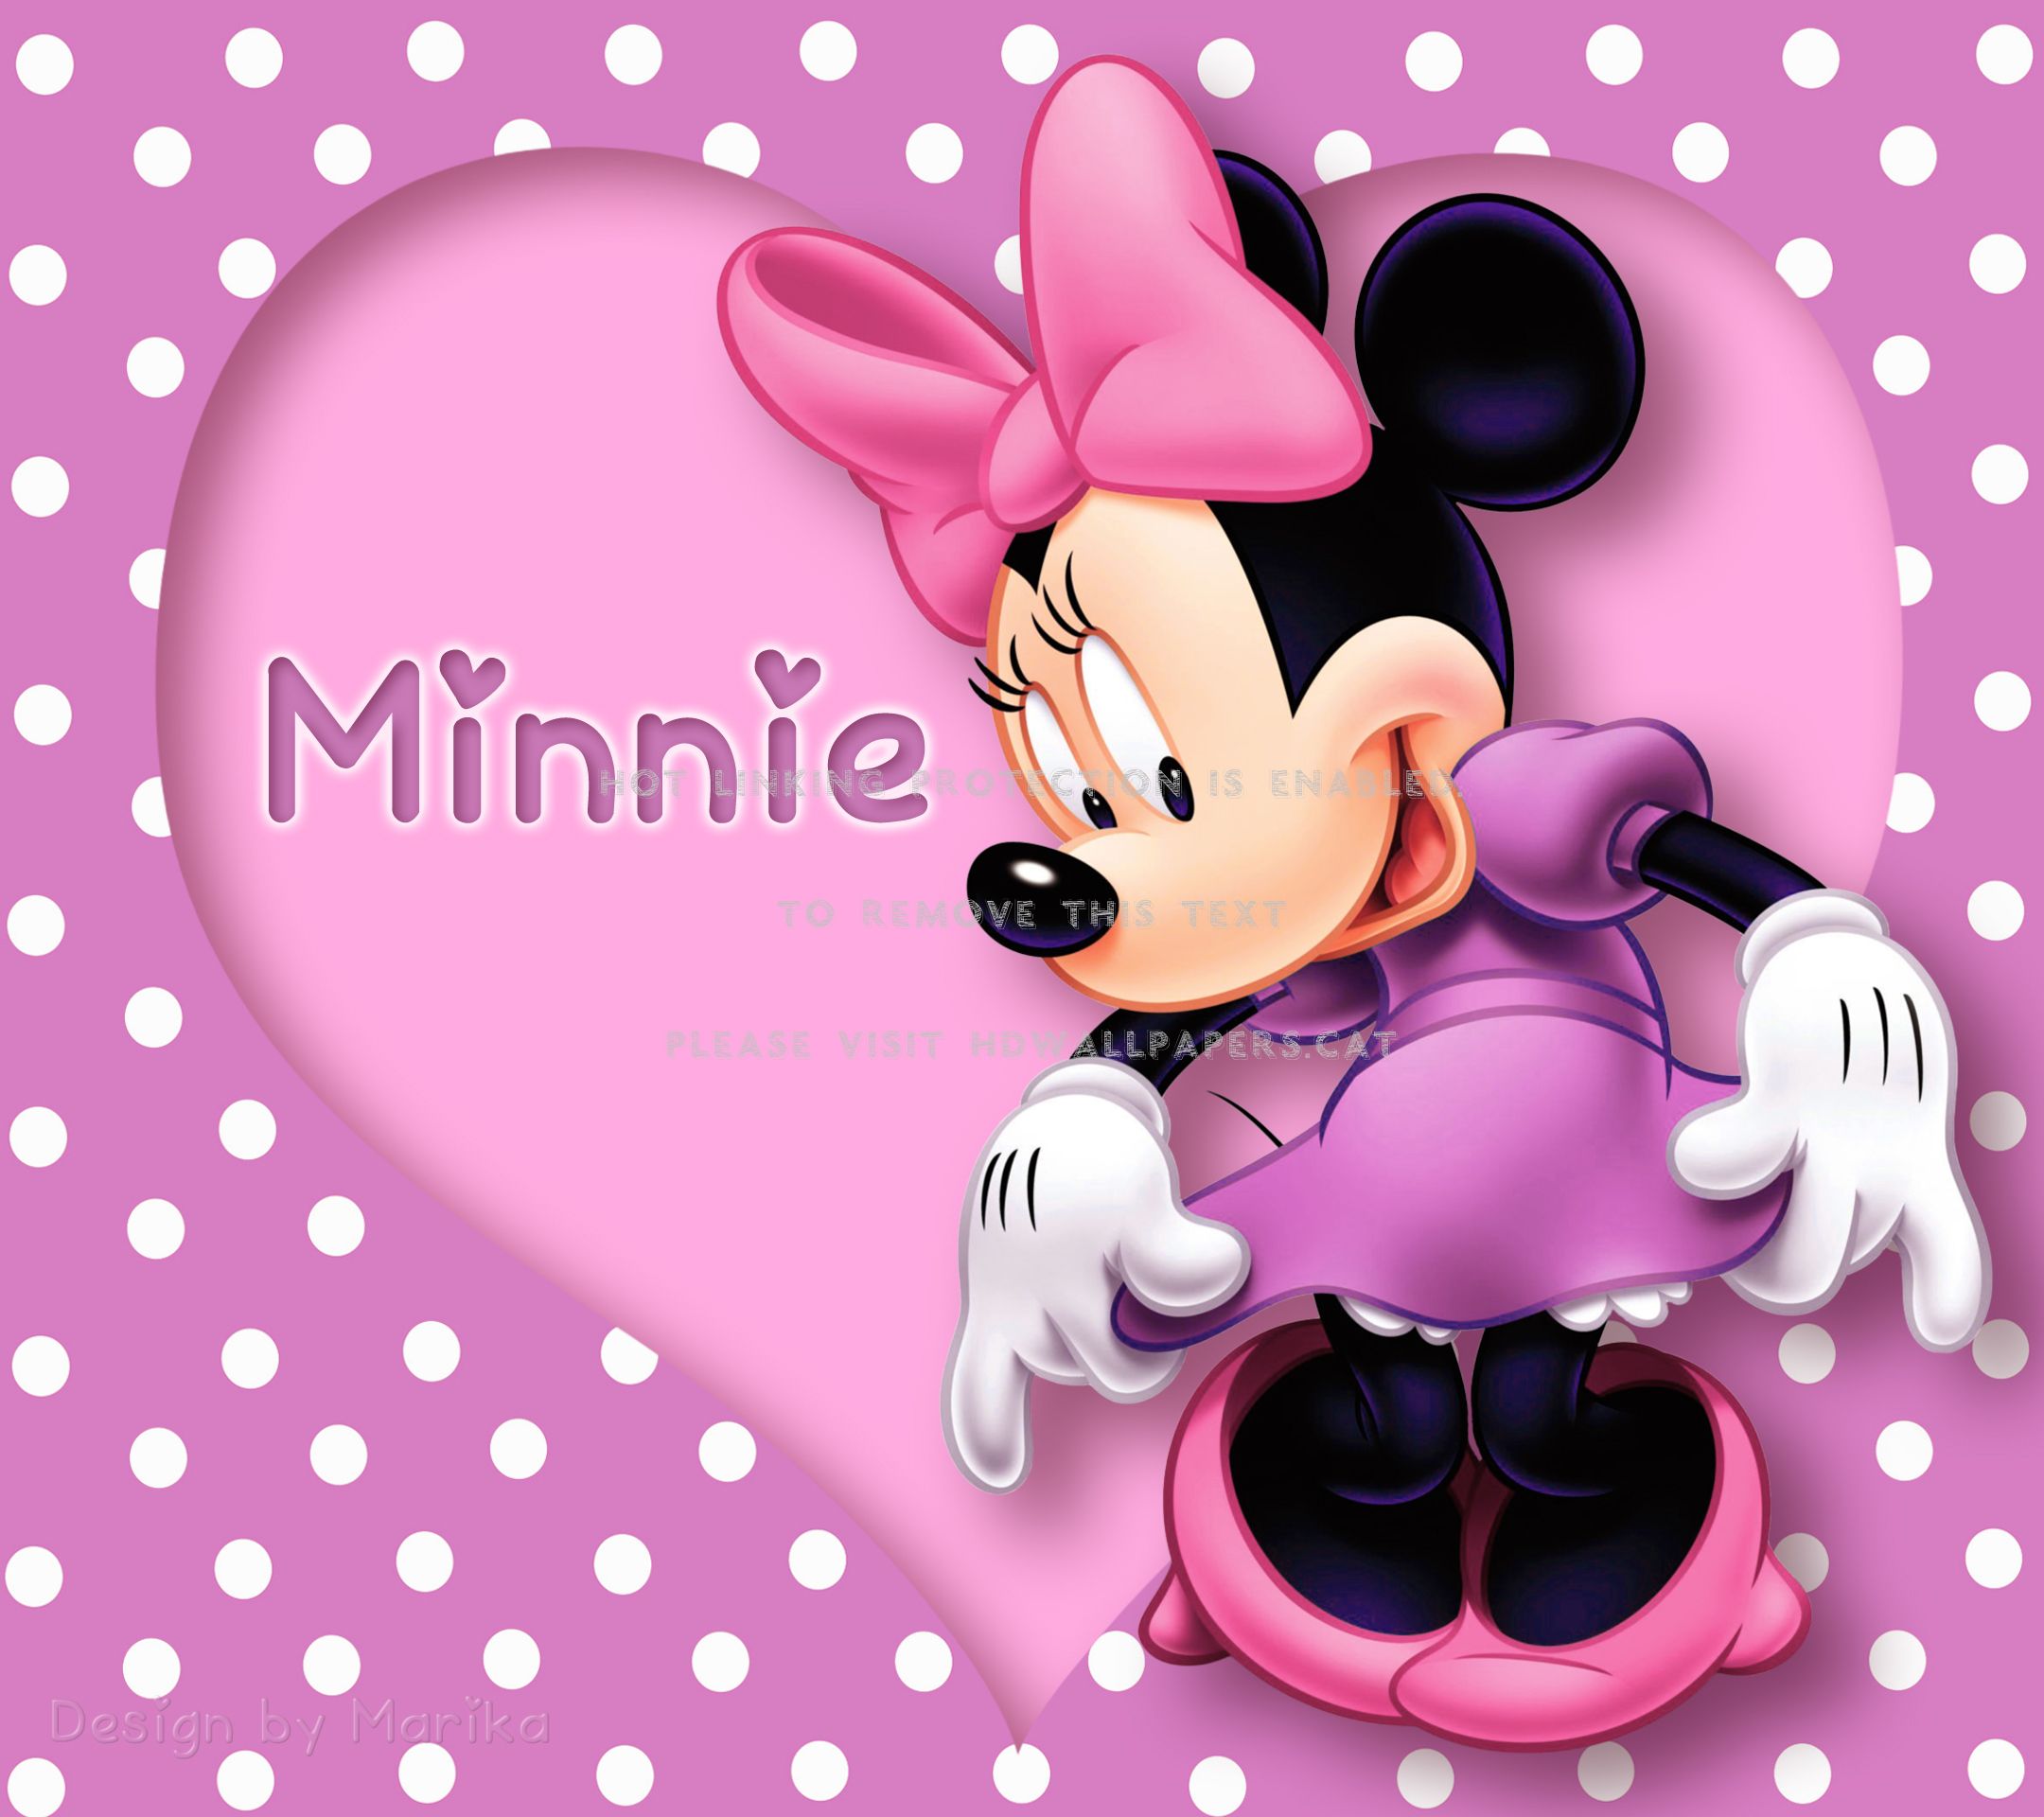 Minnie Heart Purple Disney Cute Polka Dots Mouse (life Size Stand Up)